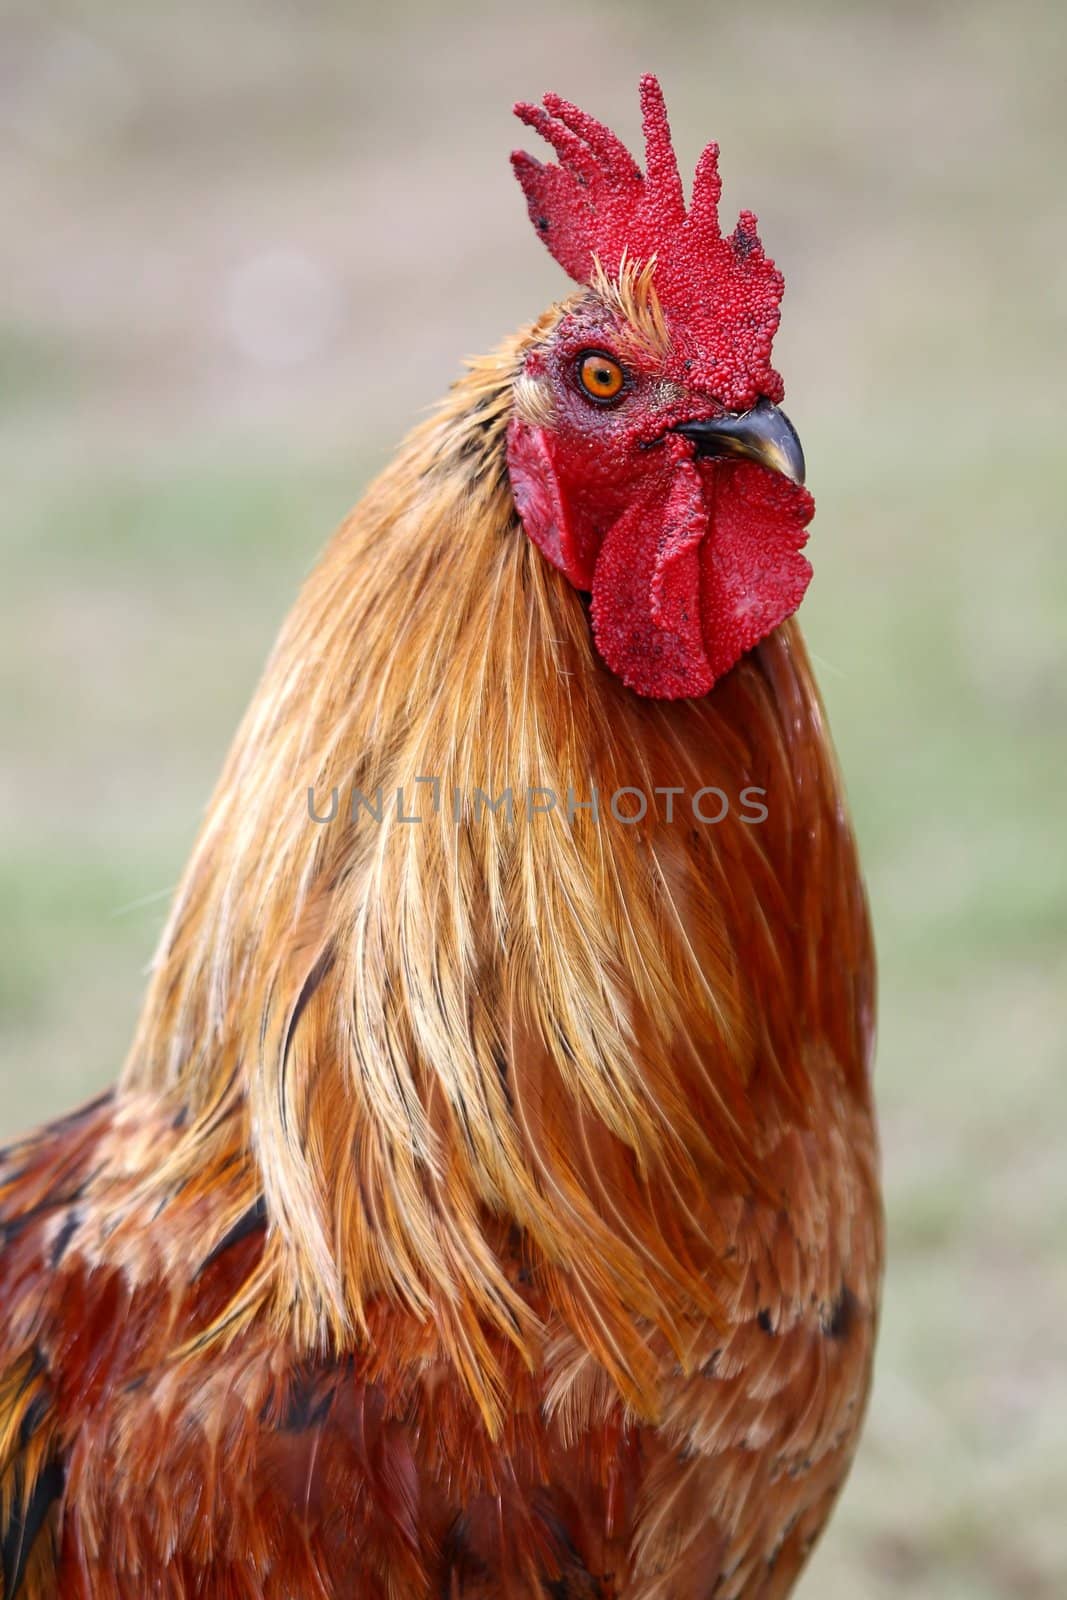 Portrait of a magnificent red rooster or cockerel bird